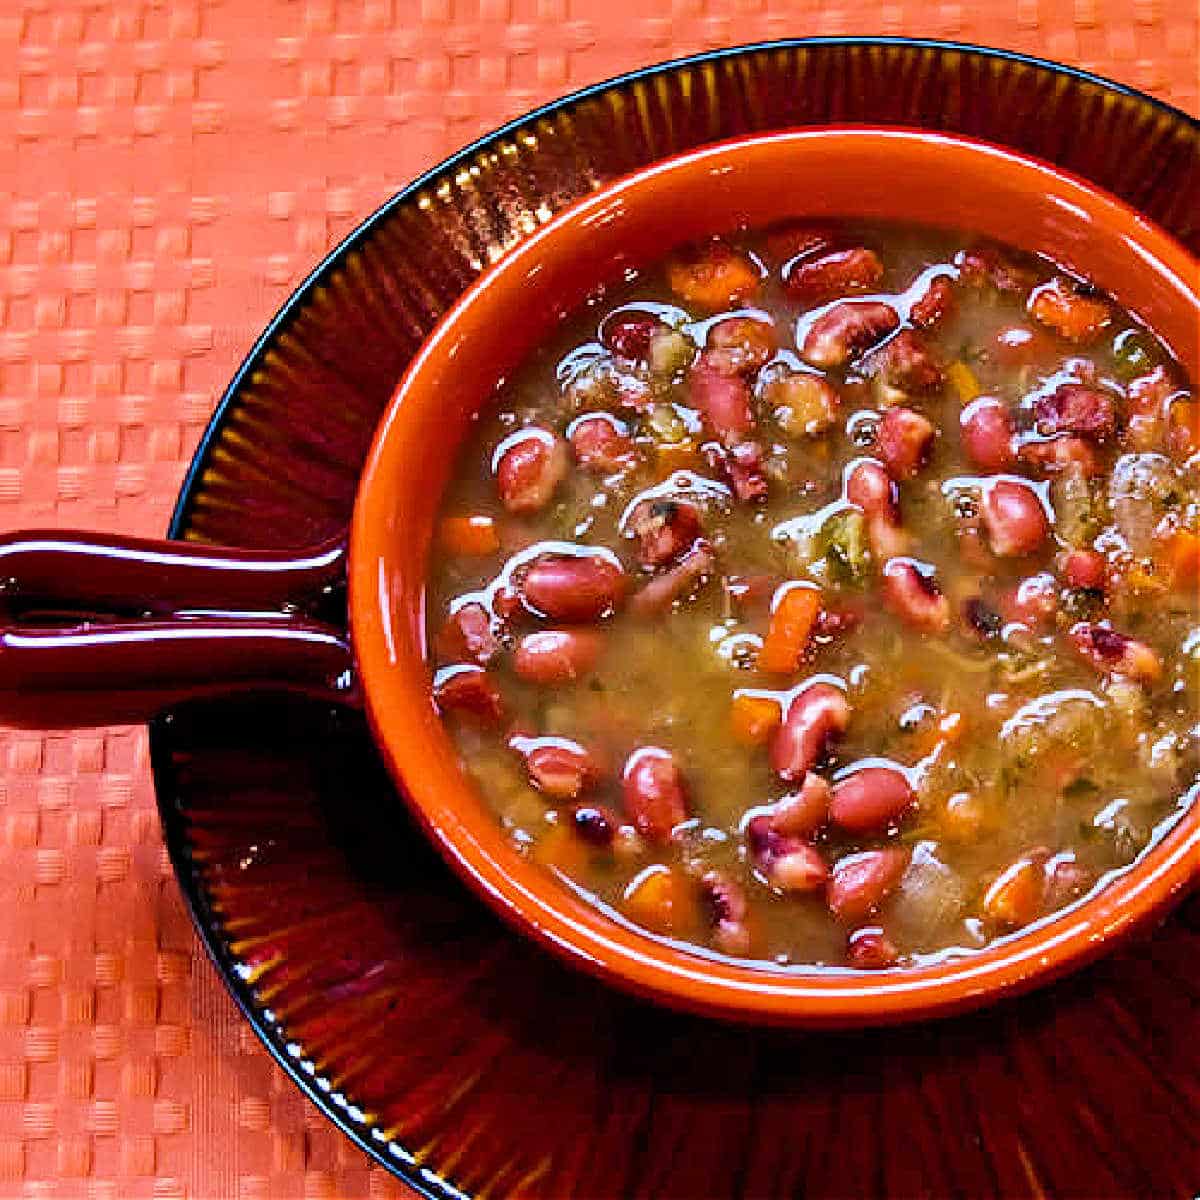 Square image for CrockPot Anasazi Bean Soup shown in bowl on matching plate.